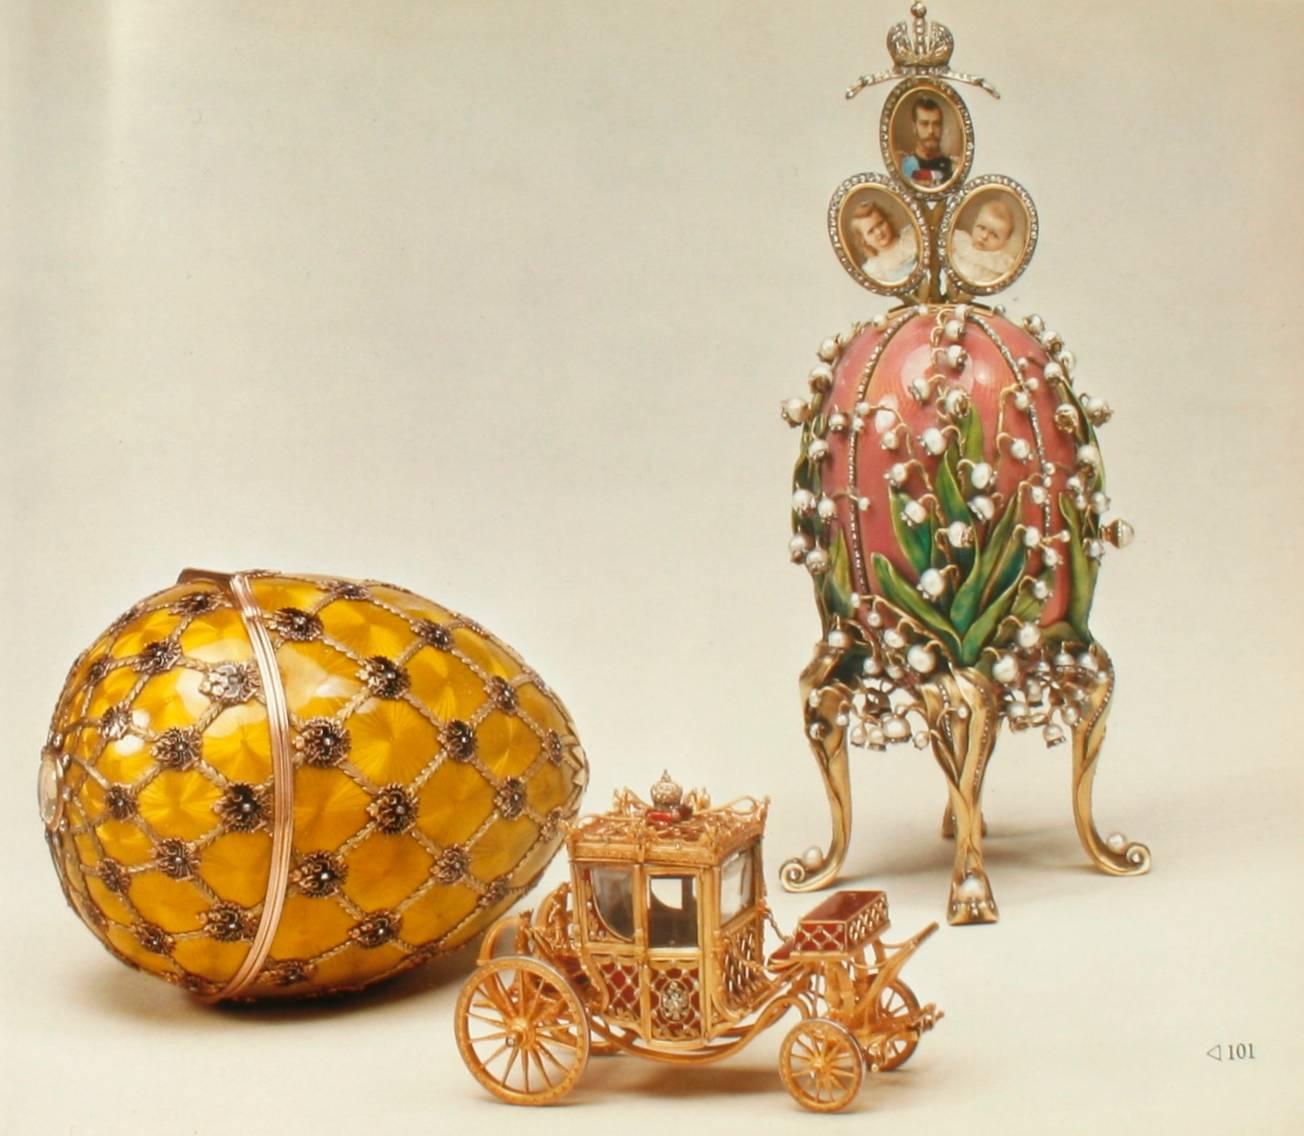 Faberge 1846-1920 introduction by Kenneth Snowman. London: Debrett's Peerage, 1977. First edition softcover. An International Loan Exhibition assembled on the occasion of the Queen's Silver Jubilee including objects from the Royal Collection at